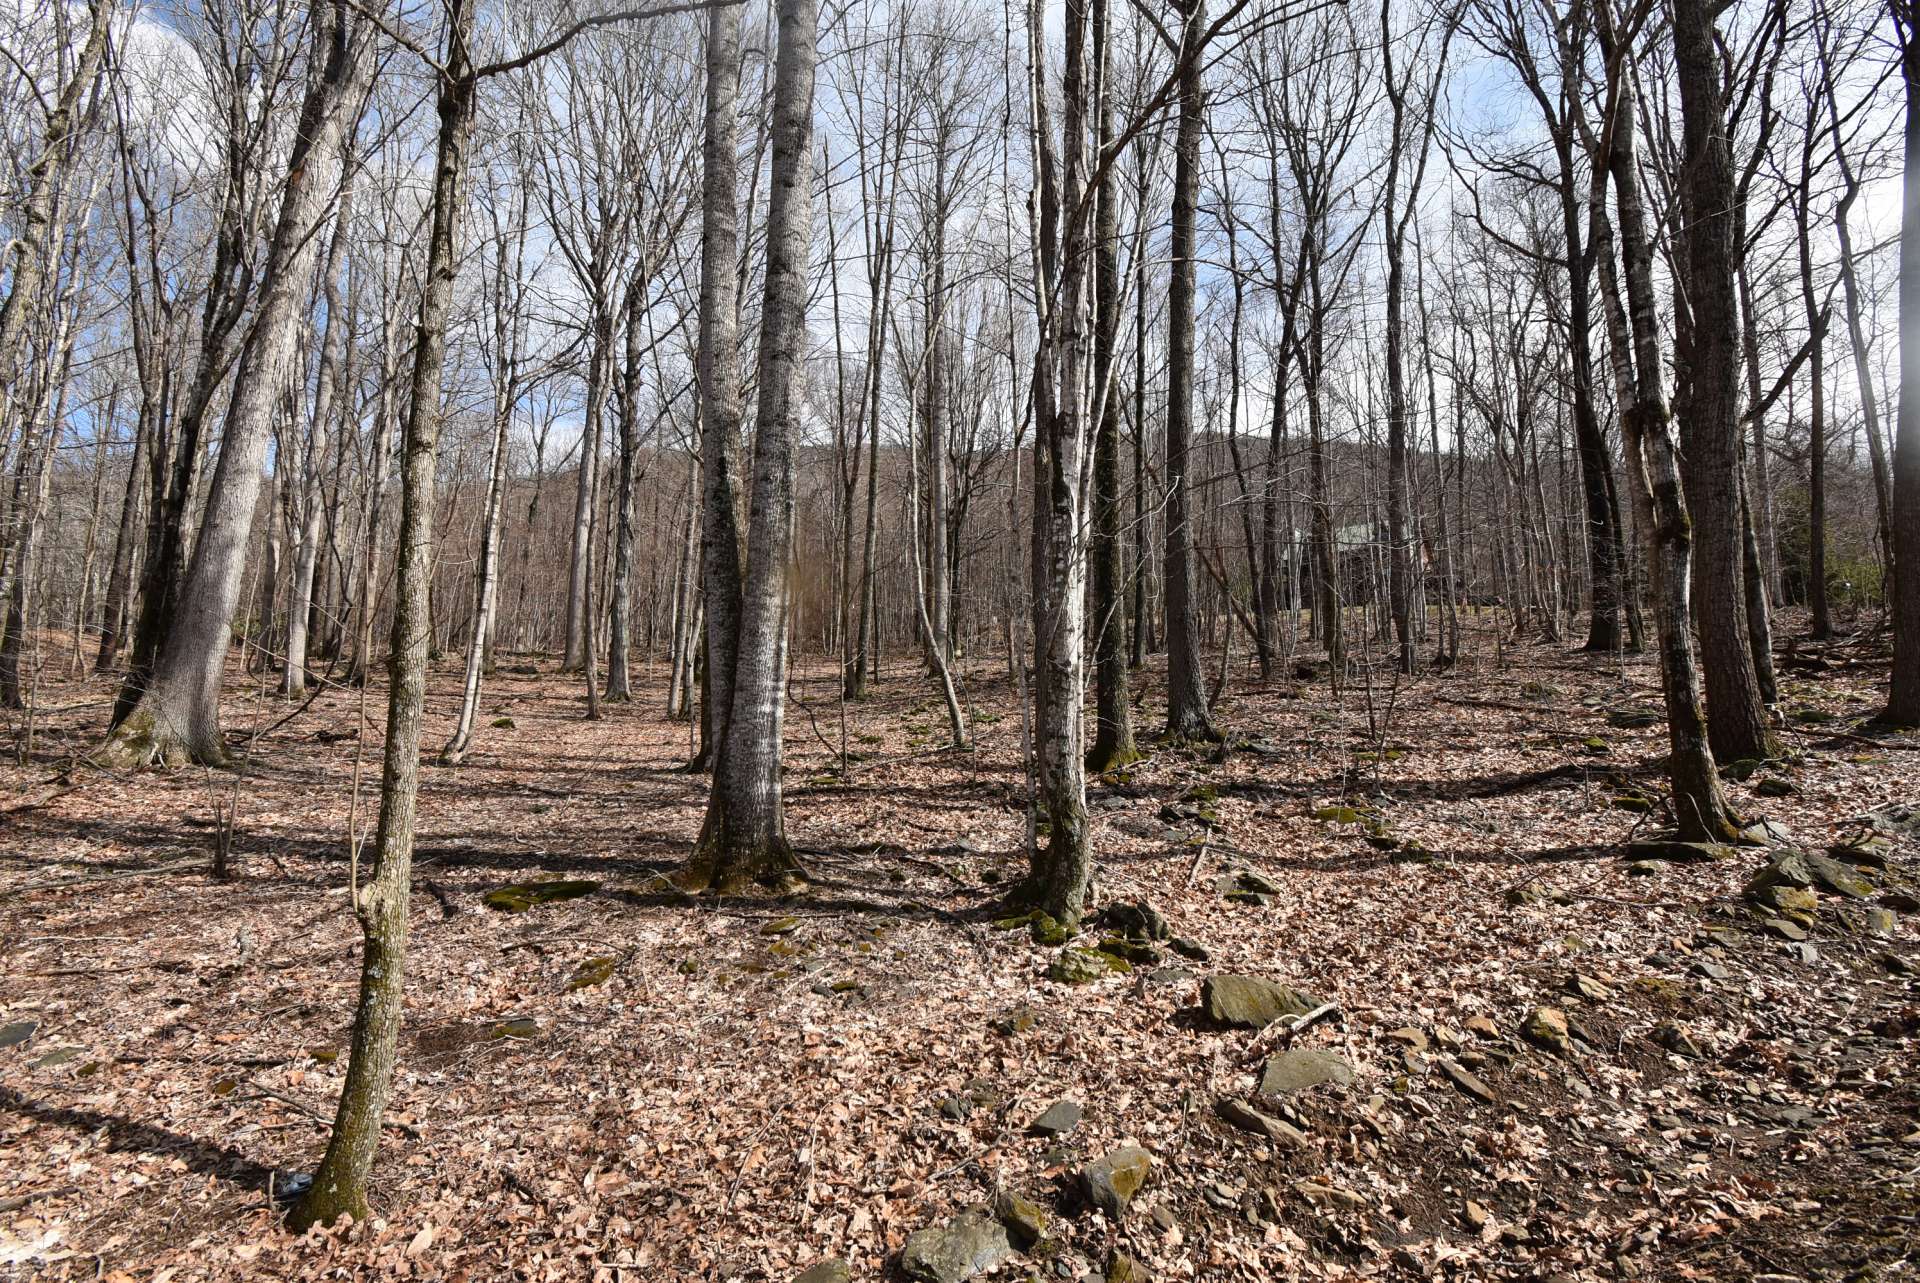 Offered at $55,000,  this NC Mountain homesite  is a great option for the construction of your mountain retreat cabin or primary home.  Call for details on listing  B204.